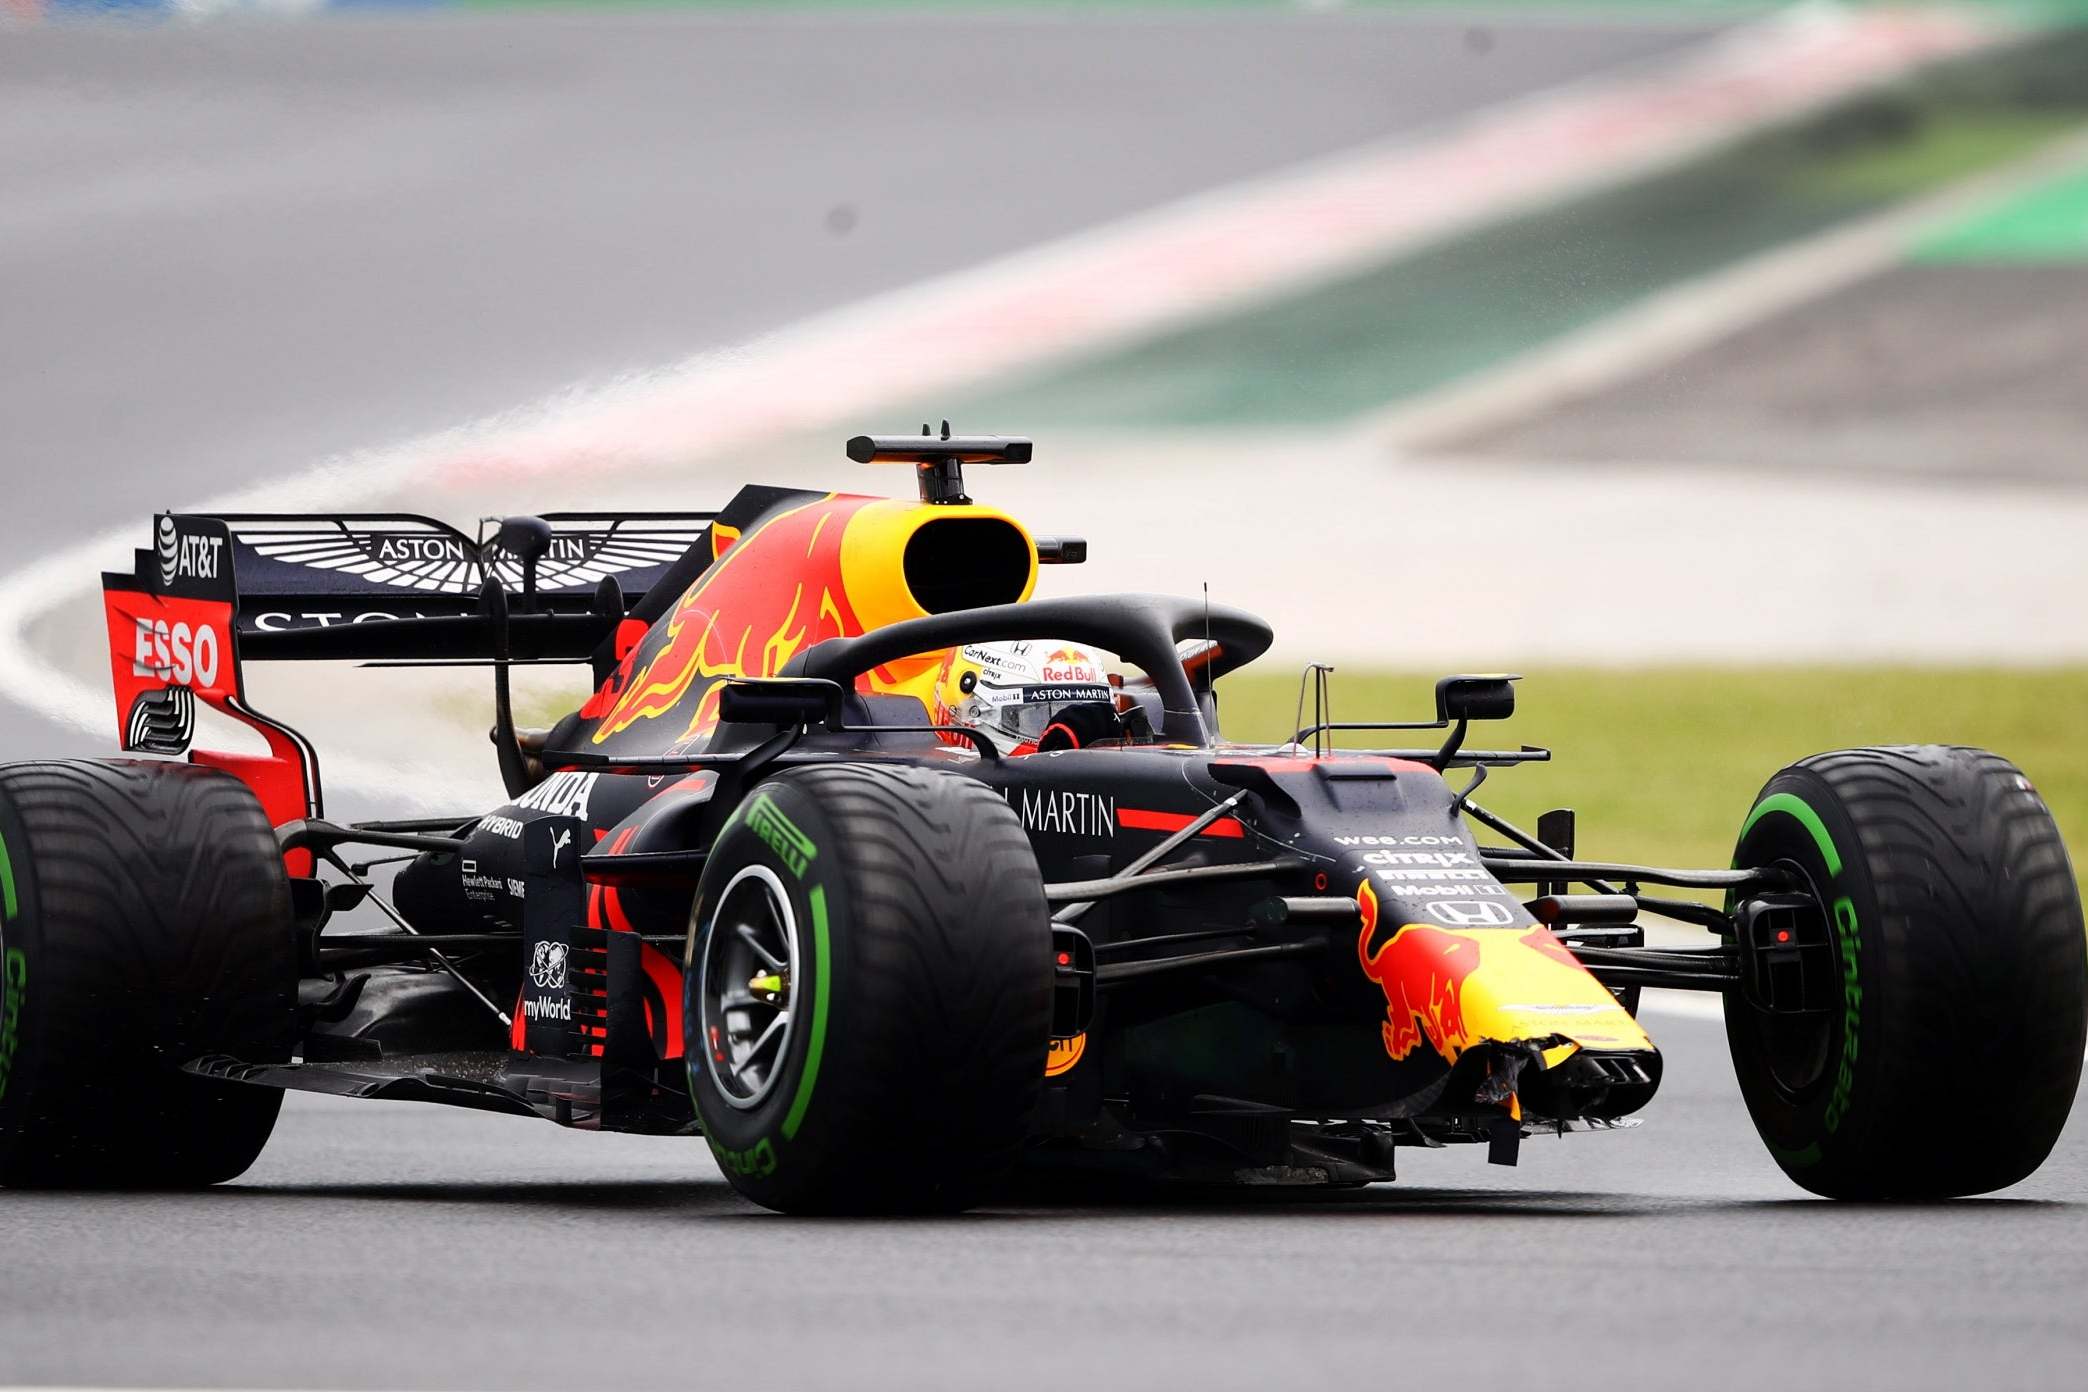 Verstappen crashed on his way to the grid in wet conditions